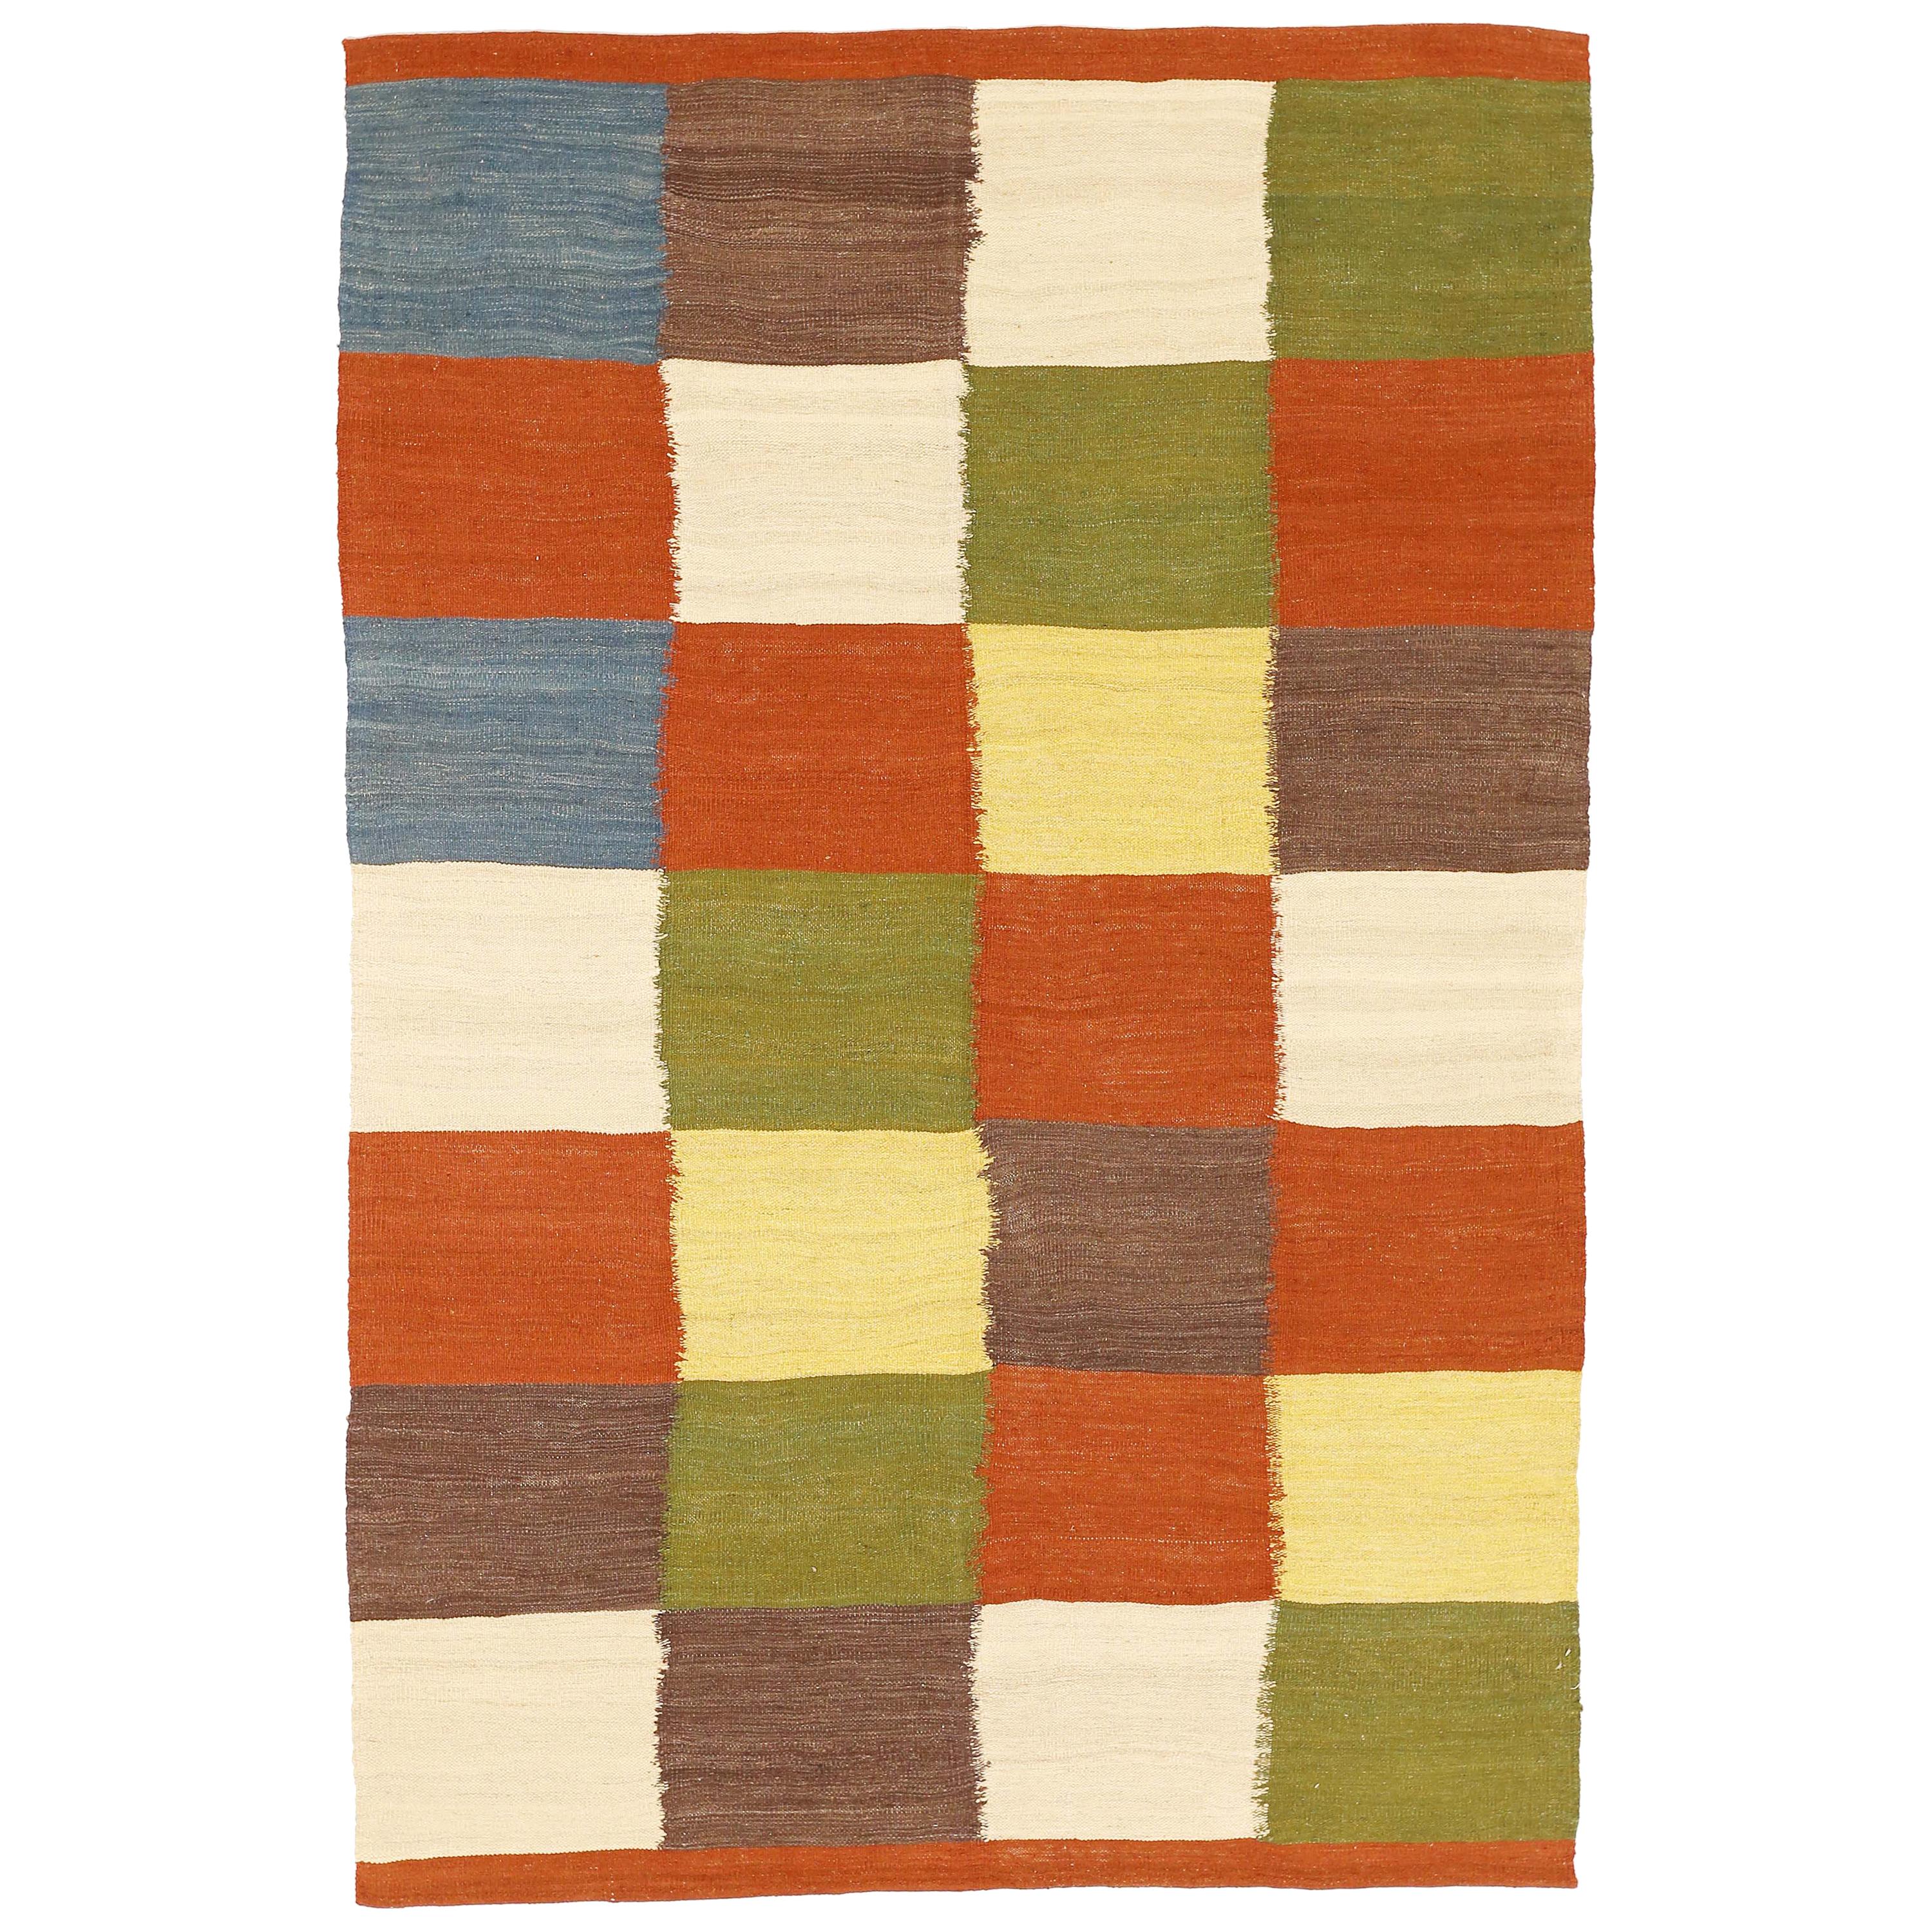 Modern Persian Kilim Style Rug with Colored Squares on Ivory Field